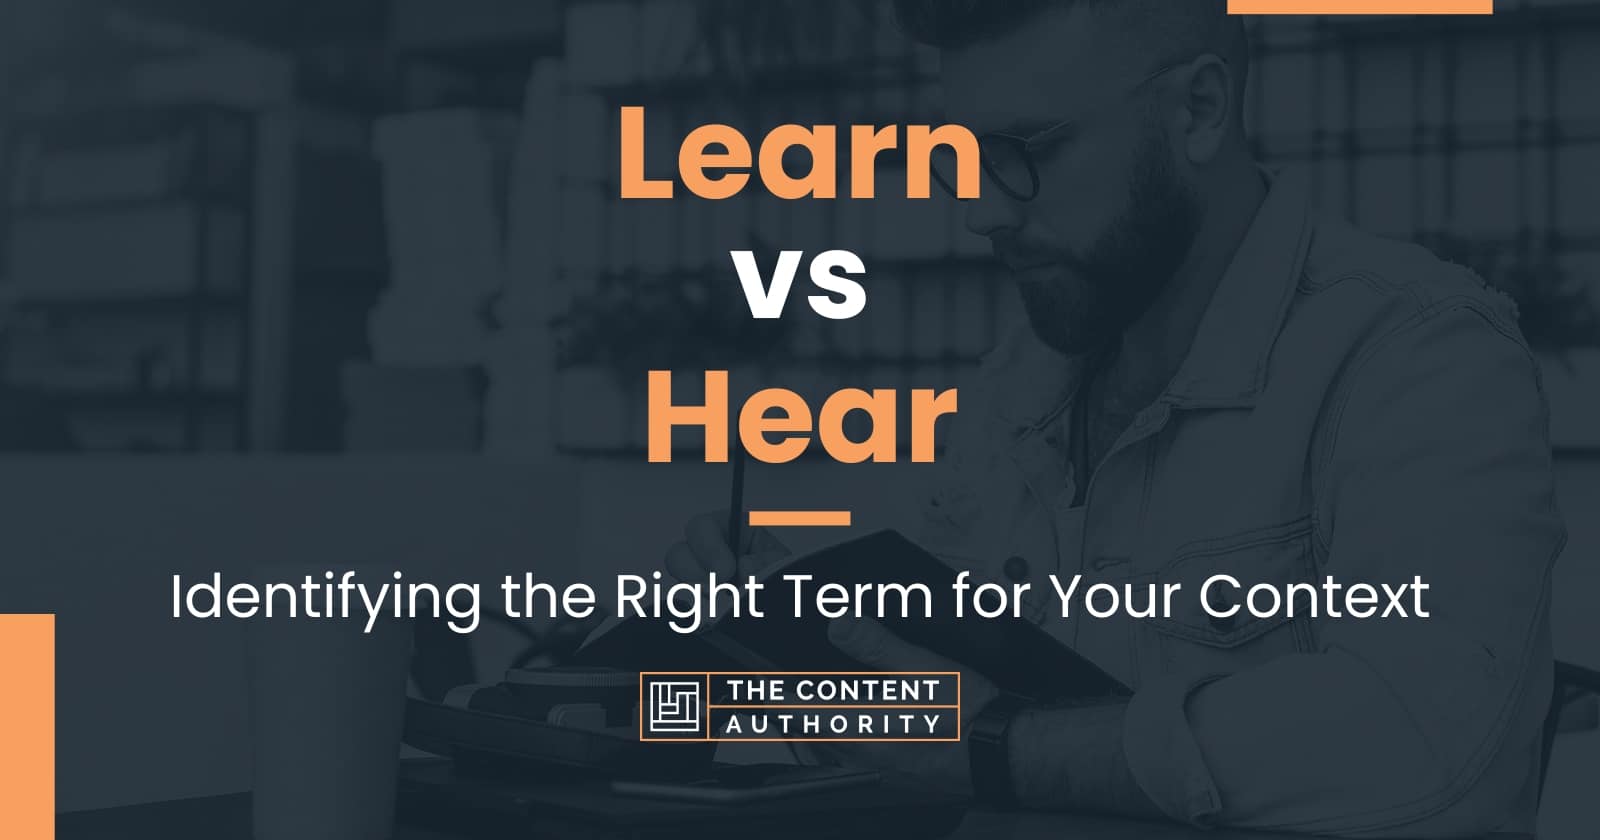 Learn vs Hear: When And How Can You Use Each One?